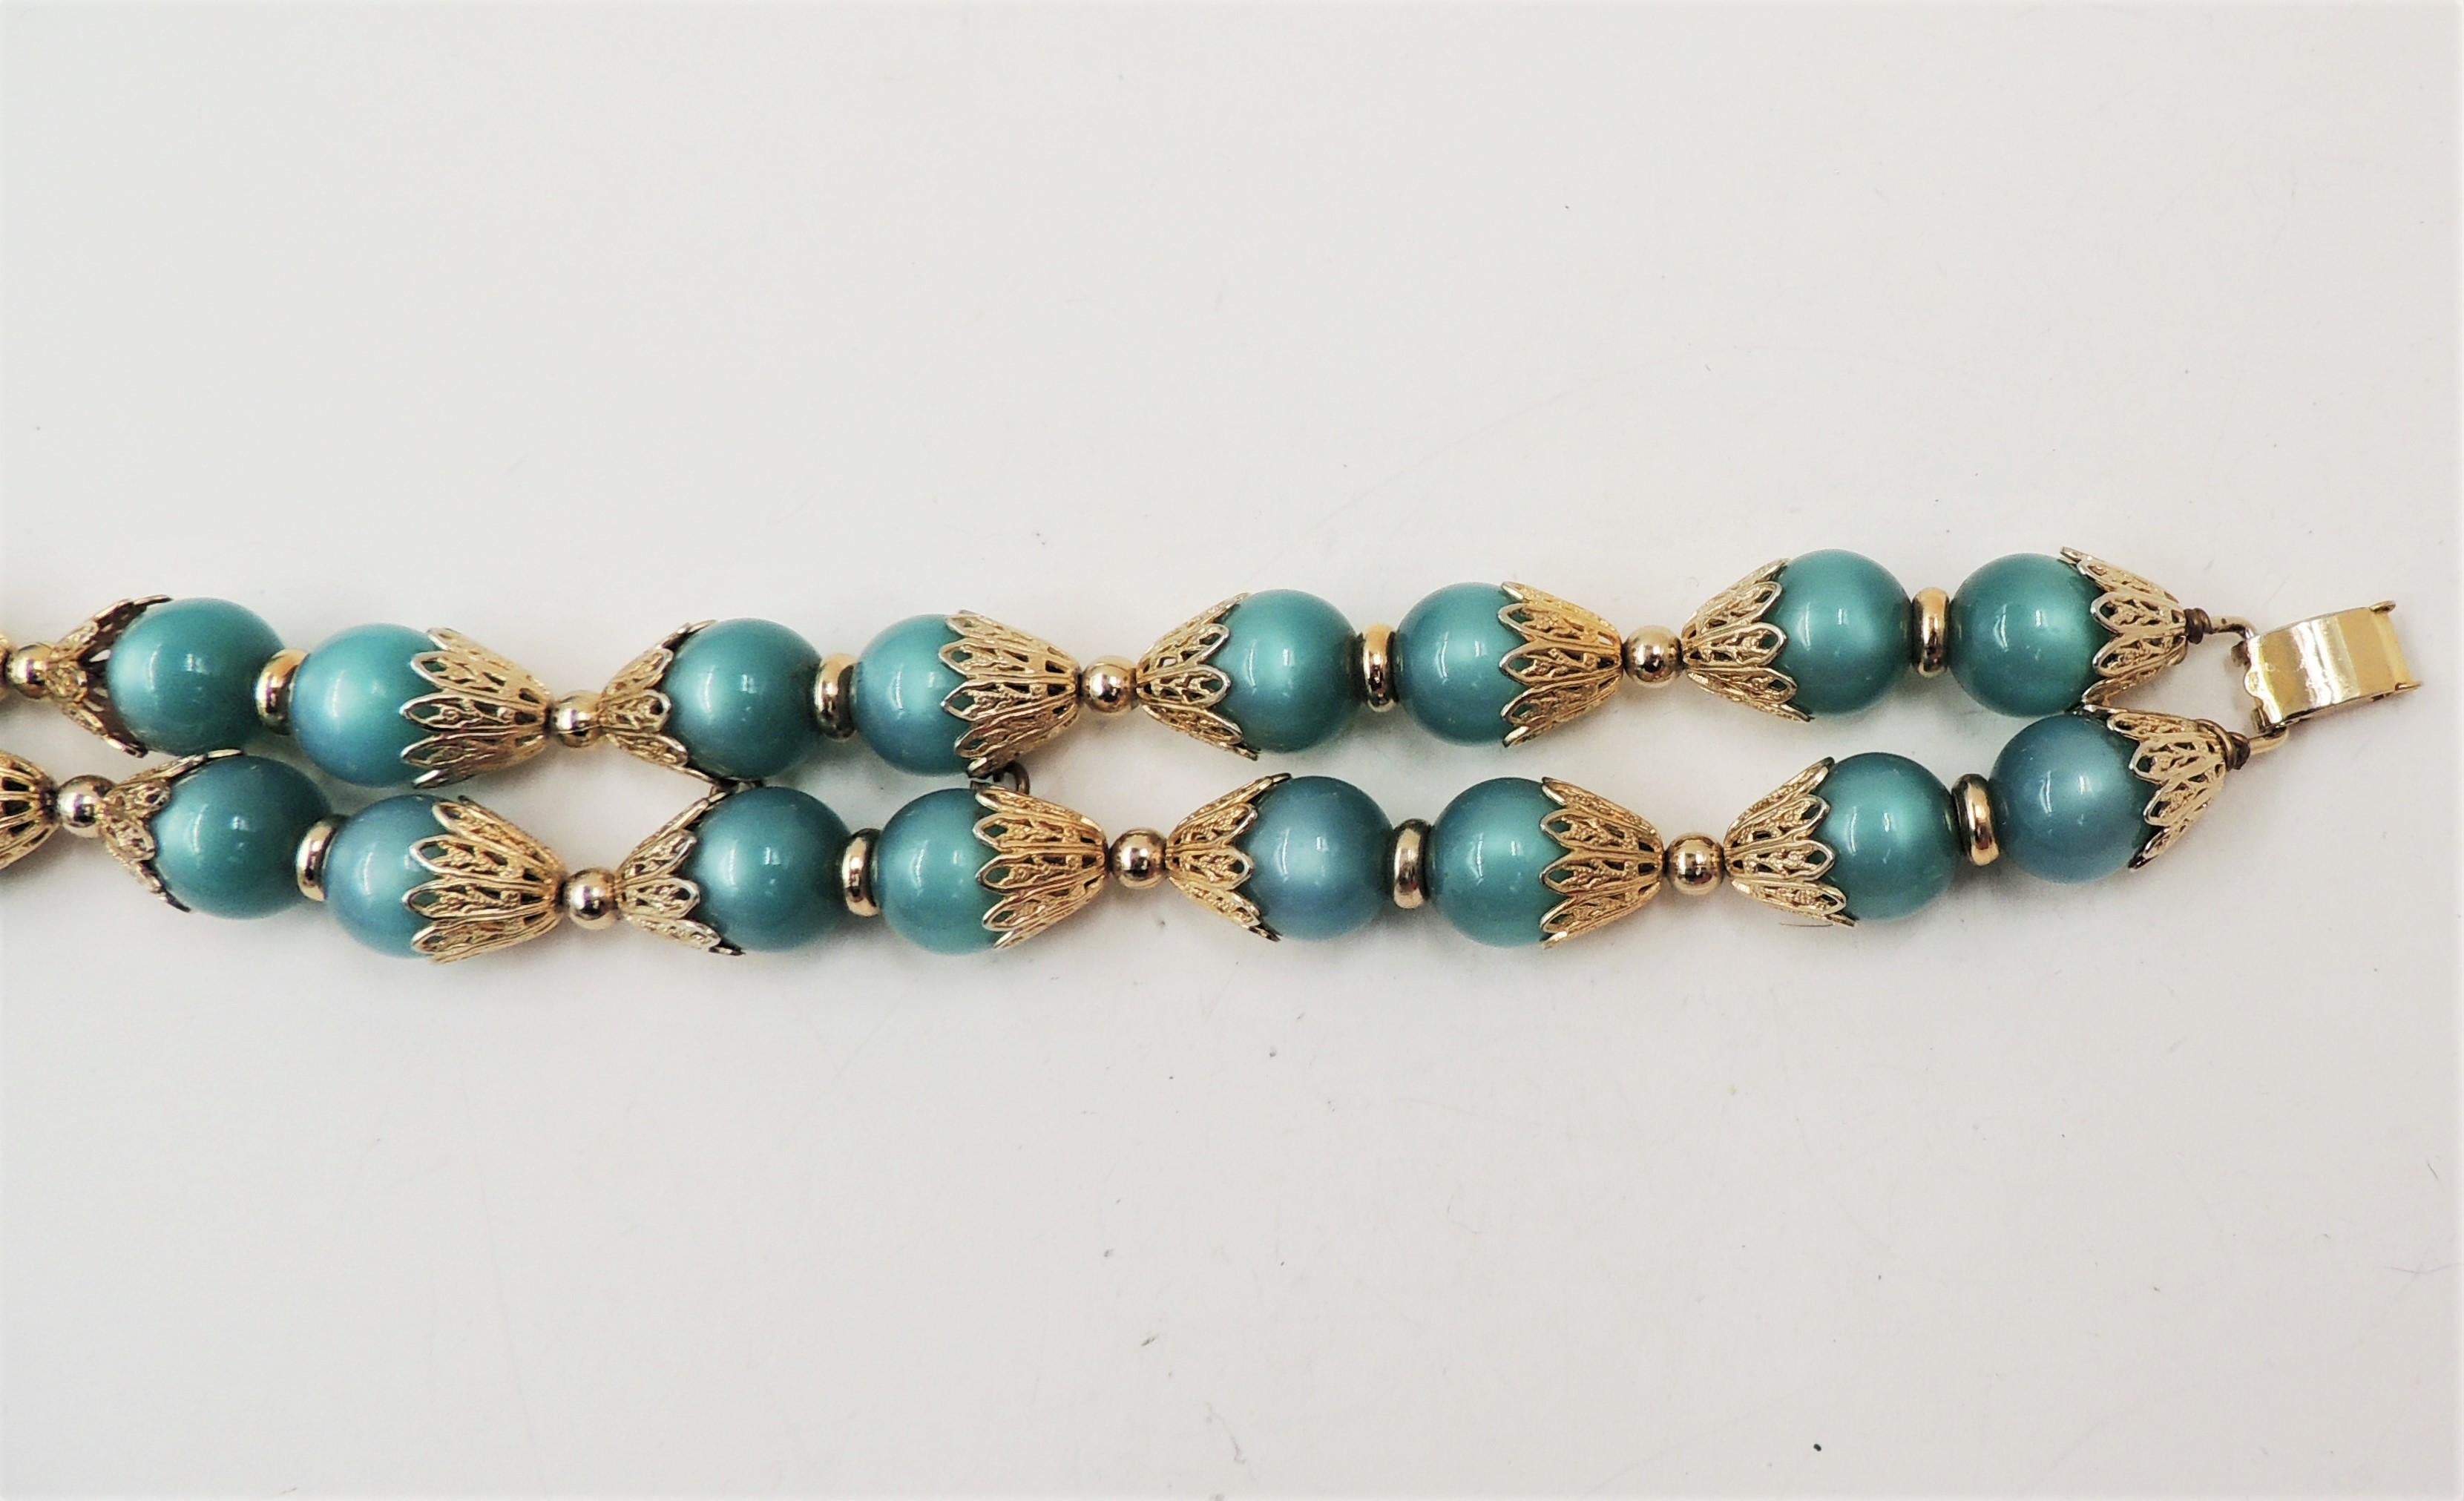 Vintage 1950s Signed Napier Goldtone Green Moonglow Beaded Bracelet In Good Condition For Sale In Easton, PA